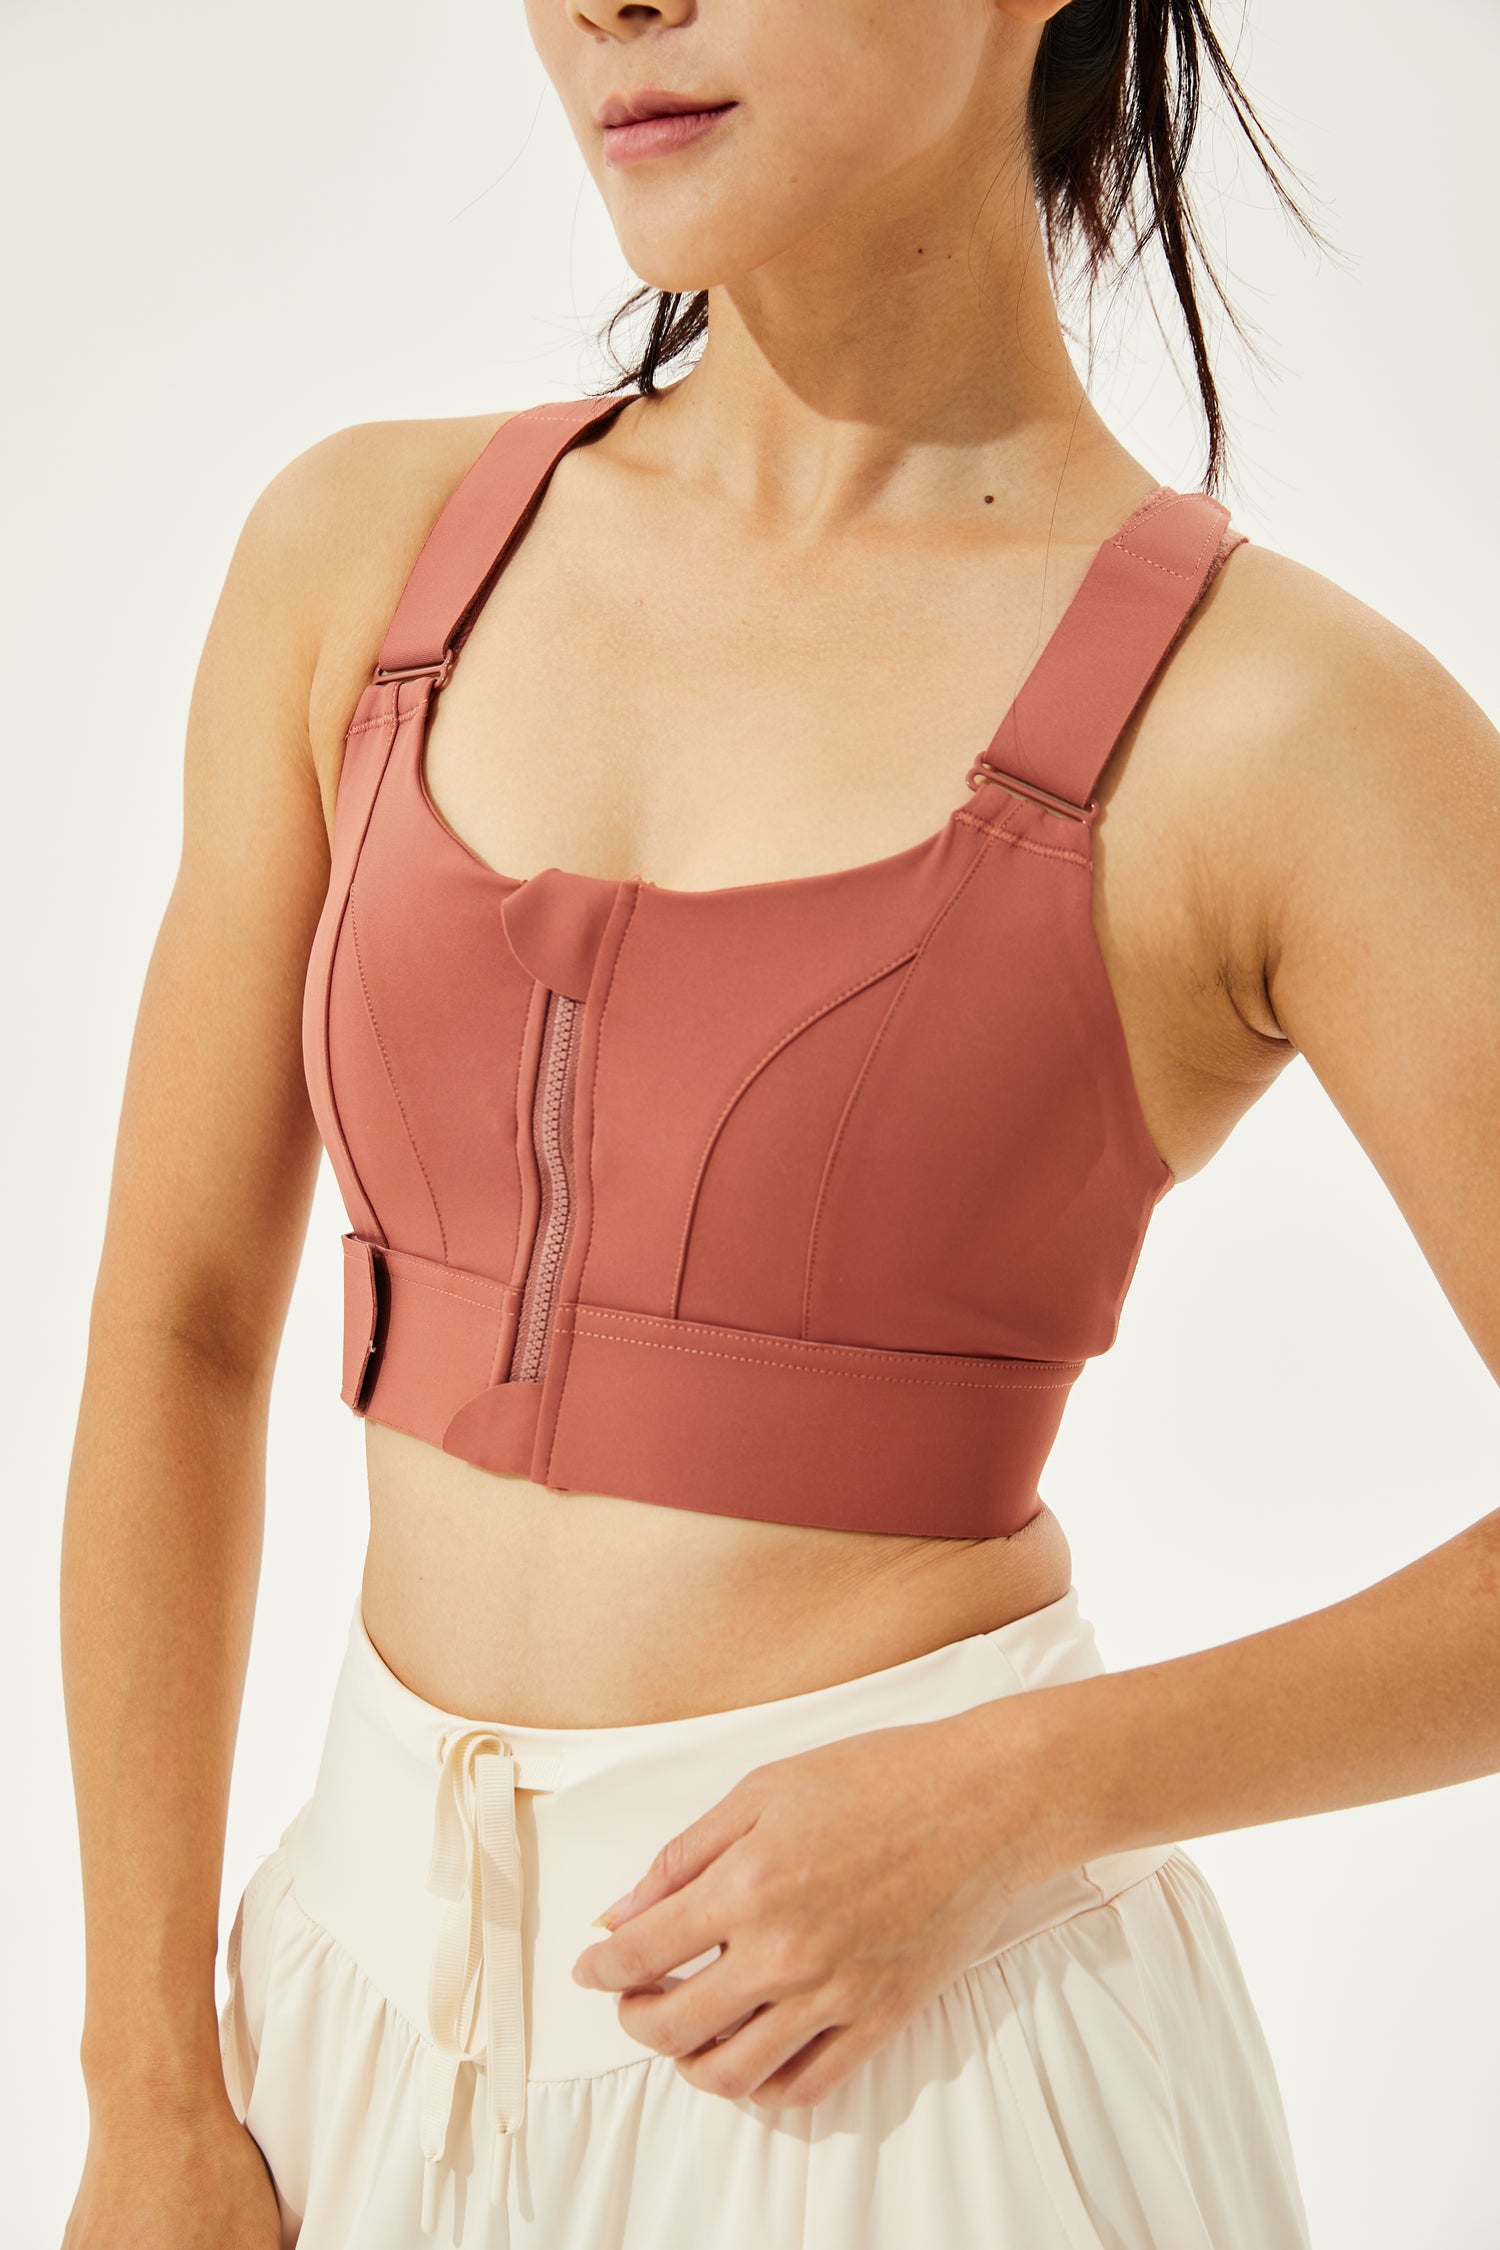 High Intensity Fully Adjustable PowerFlex Sports Bra with Zip and Moulded Bra Cups (Up To 4XL)